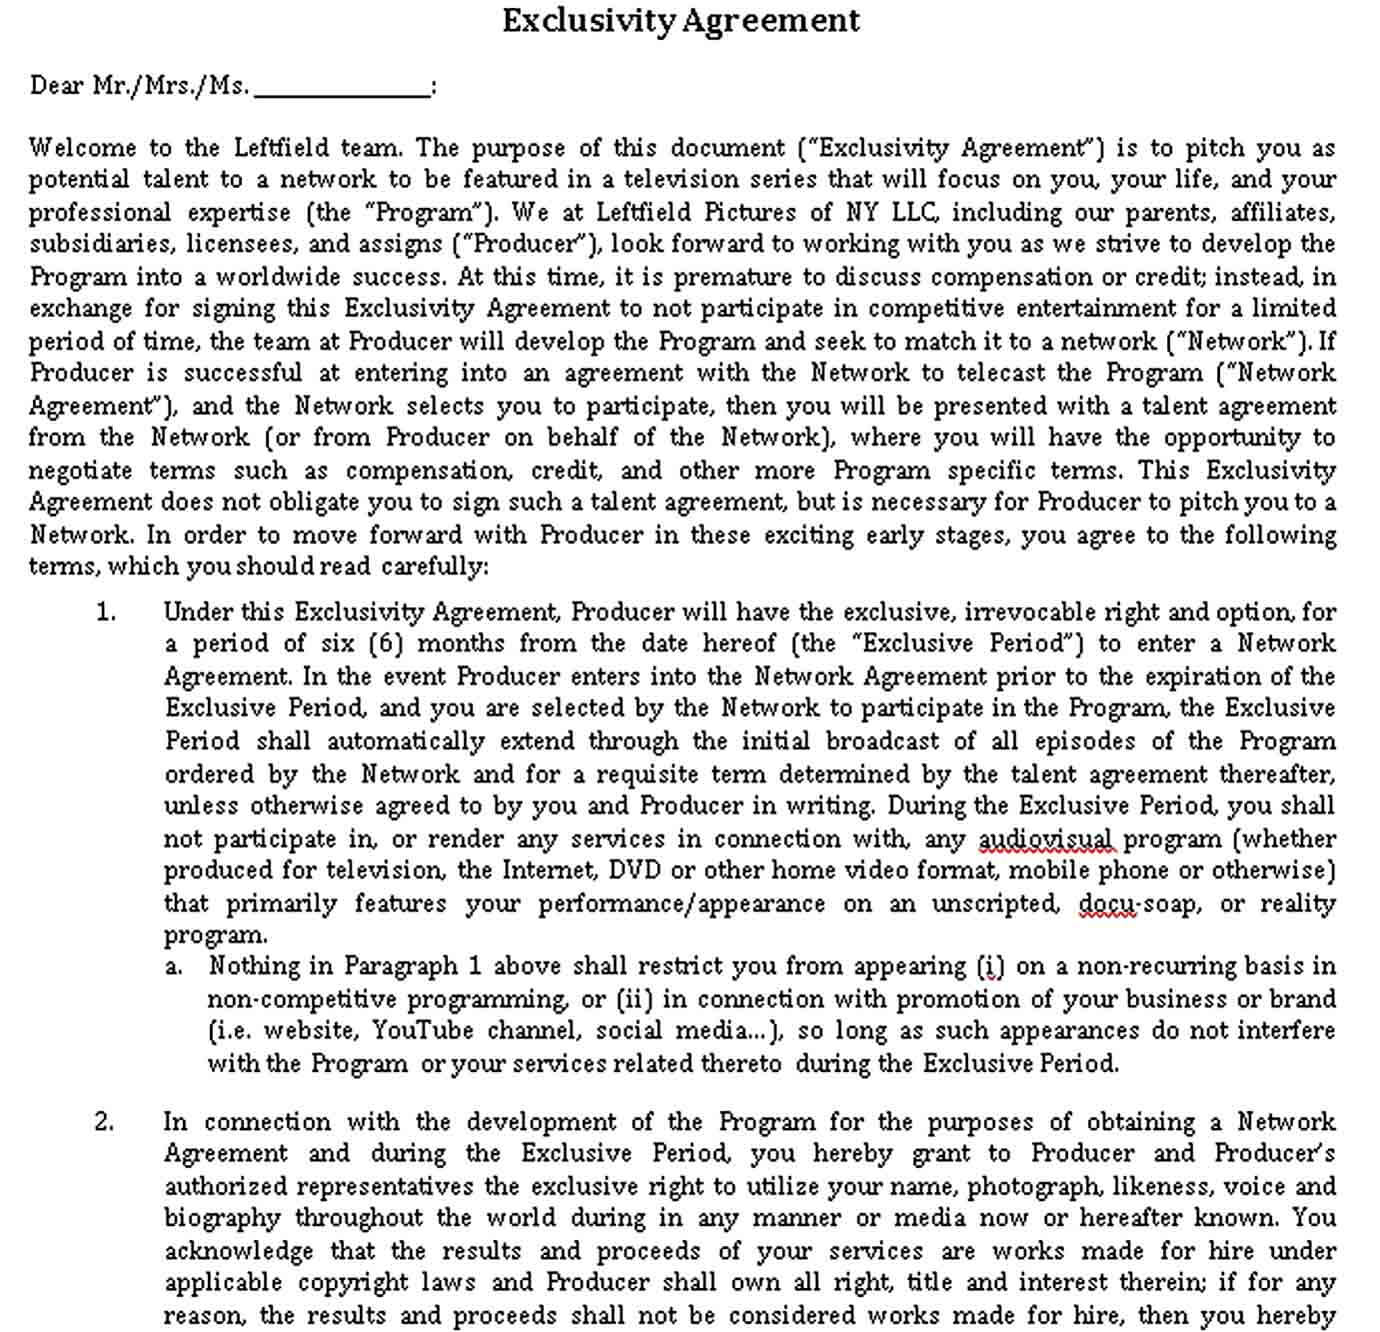 Exclusivity Agreement Template